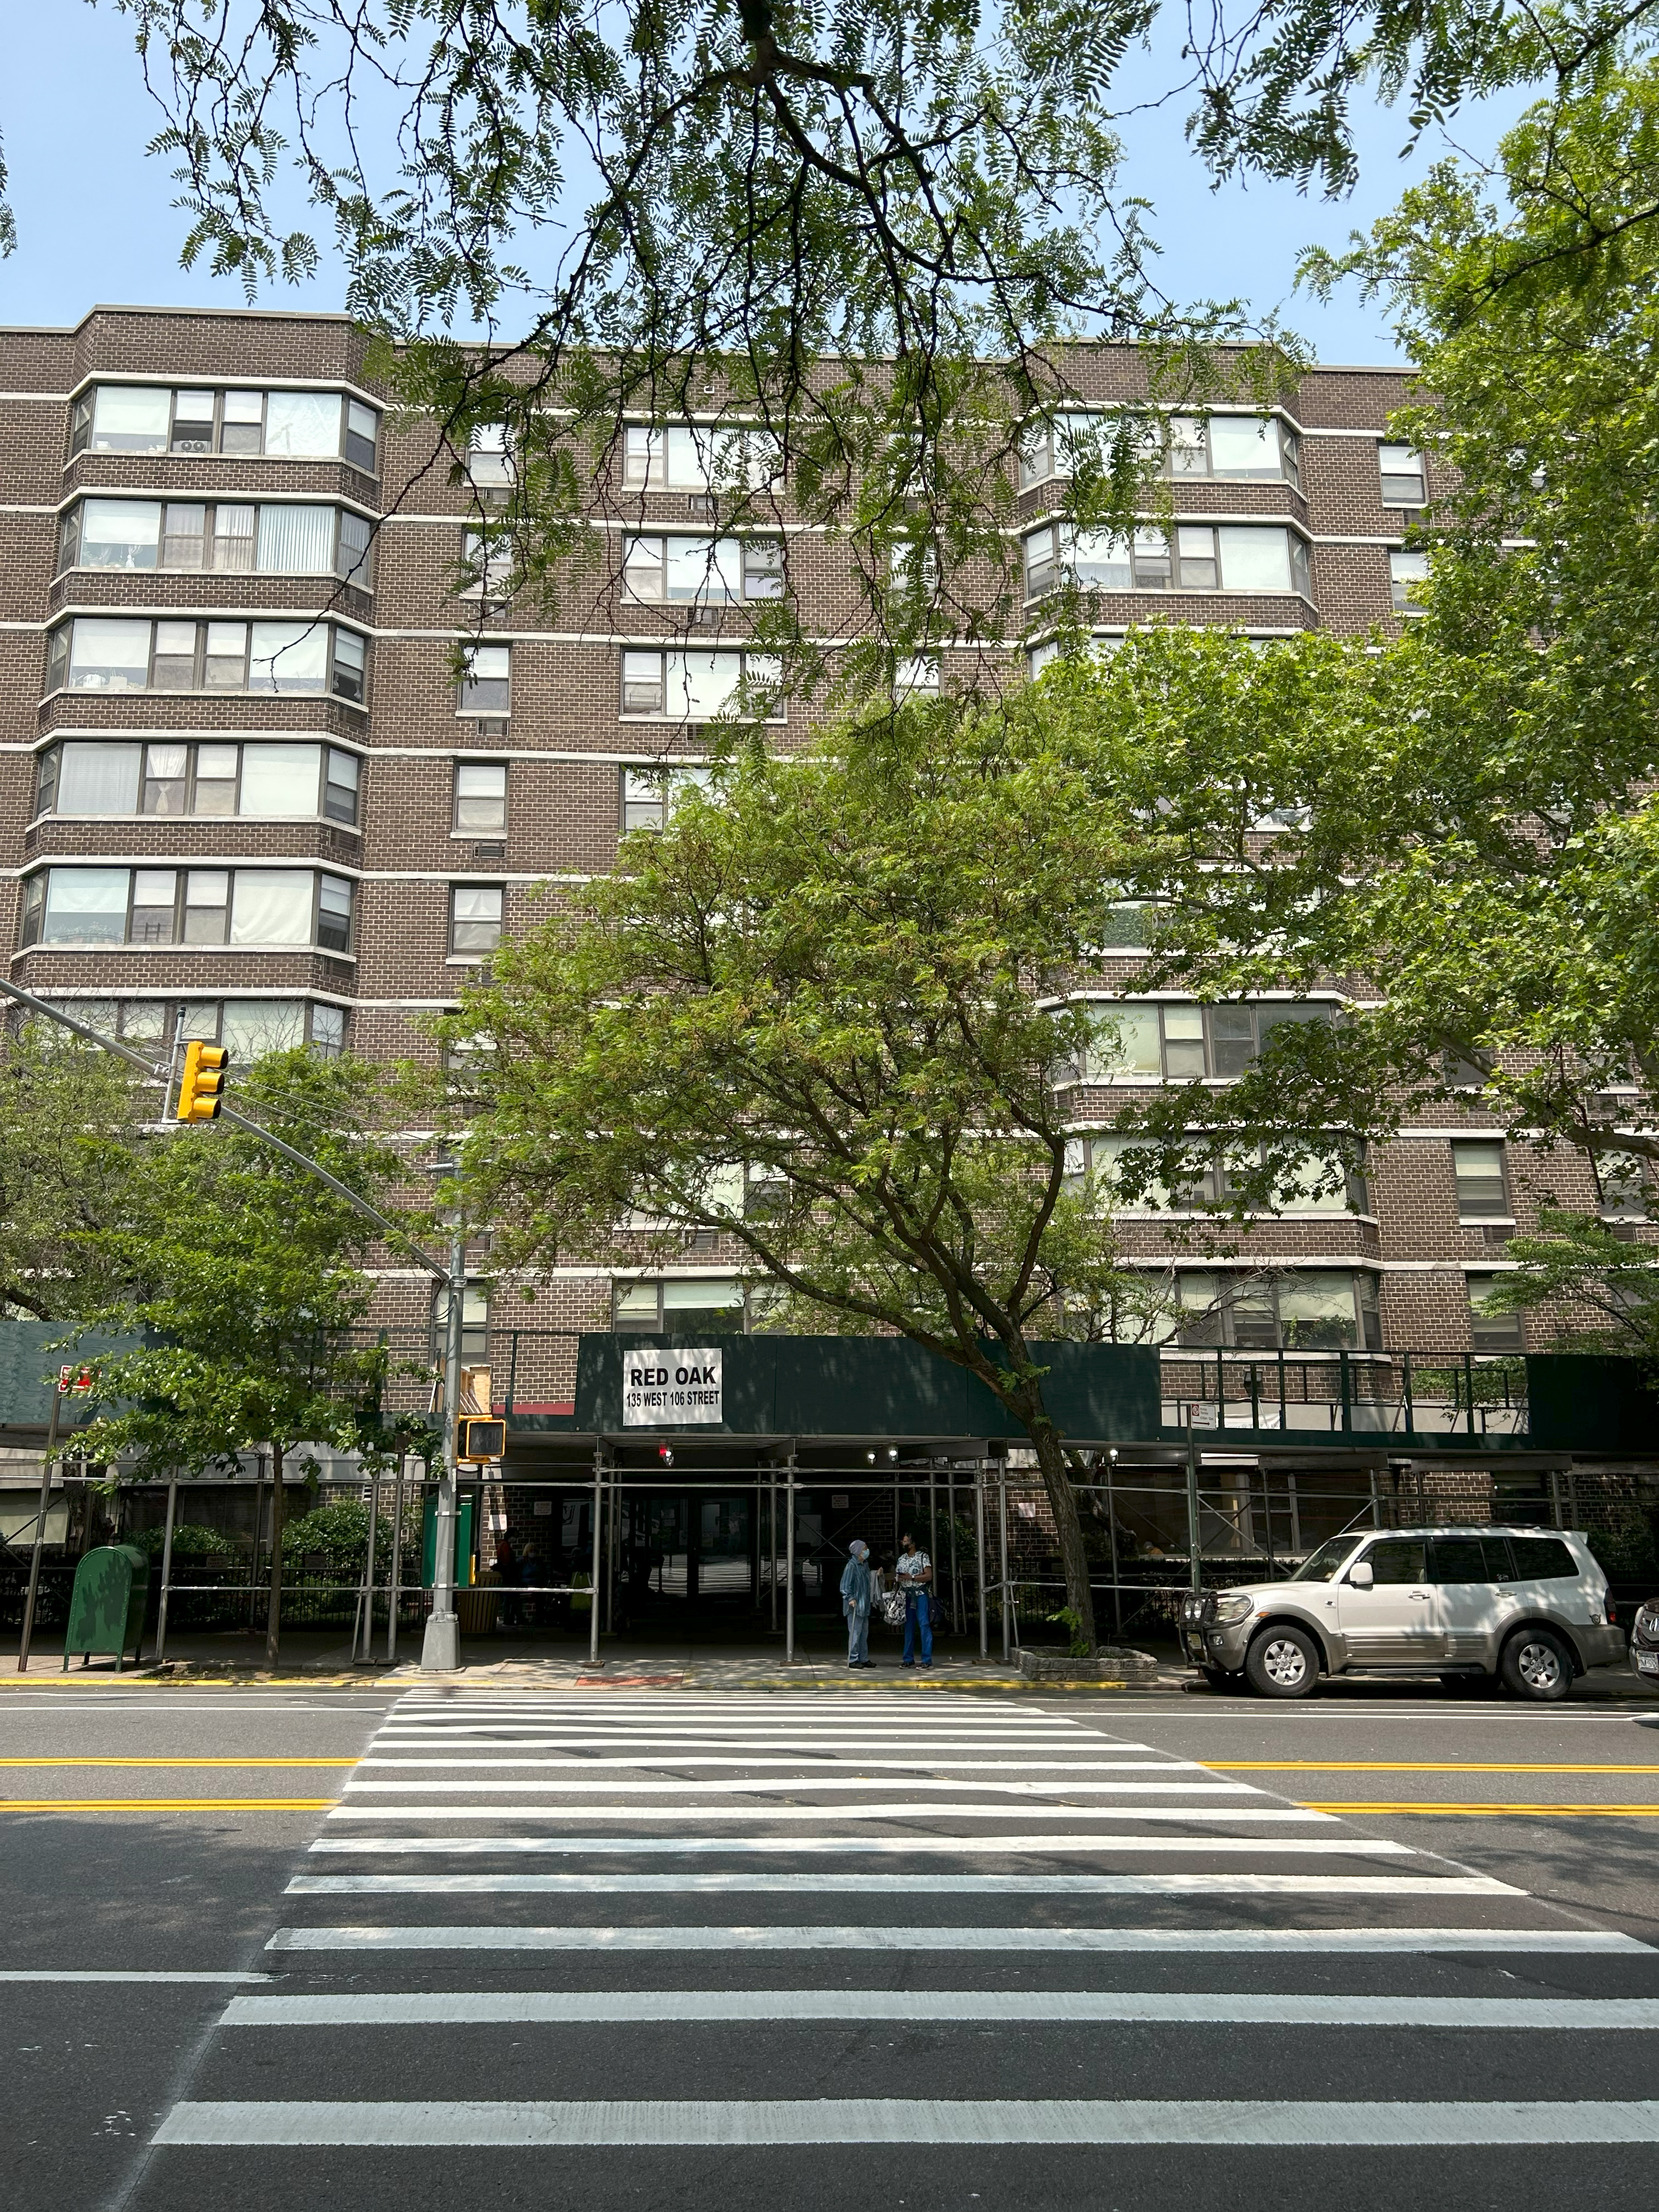 149 West 106th Street: Red Oak Apartments